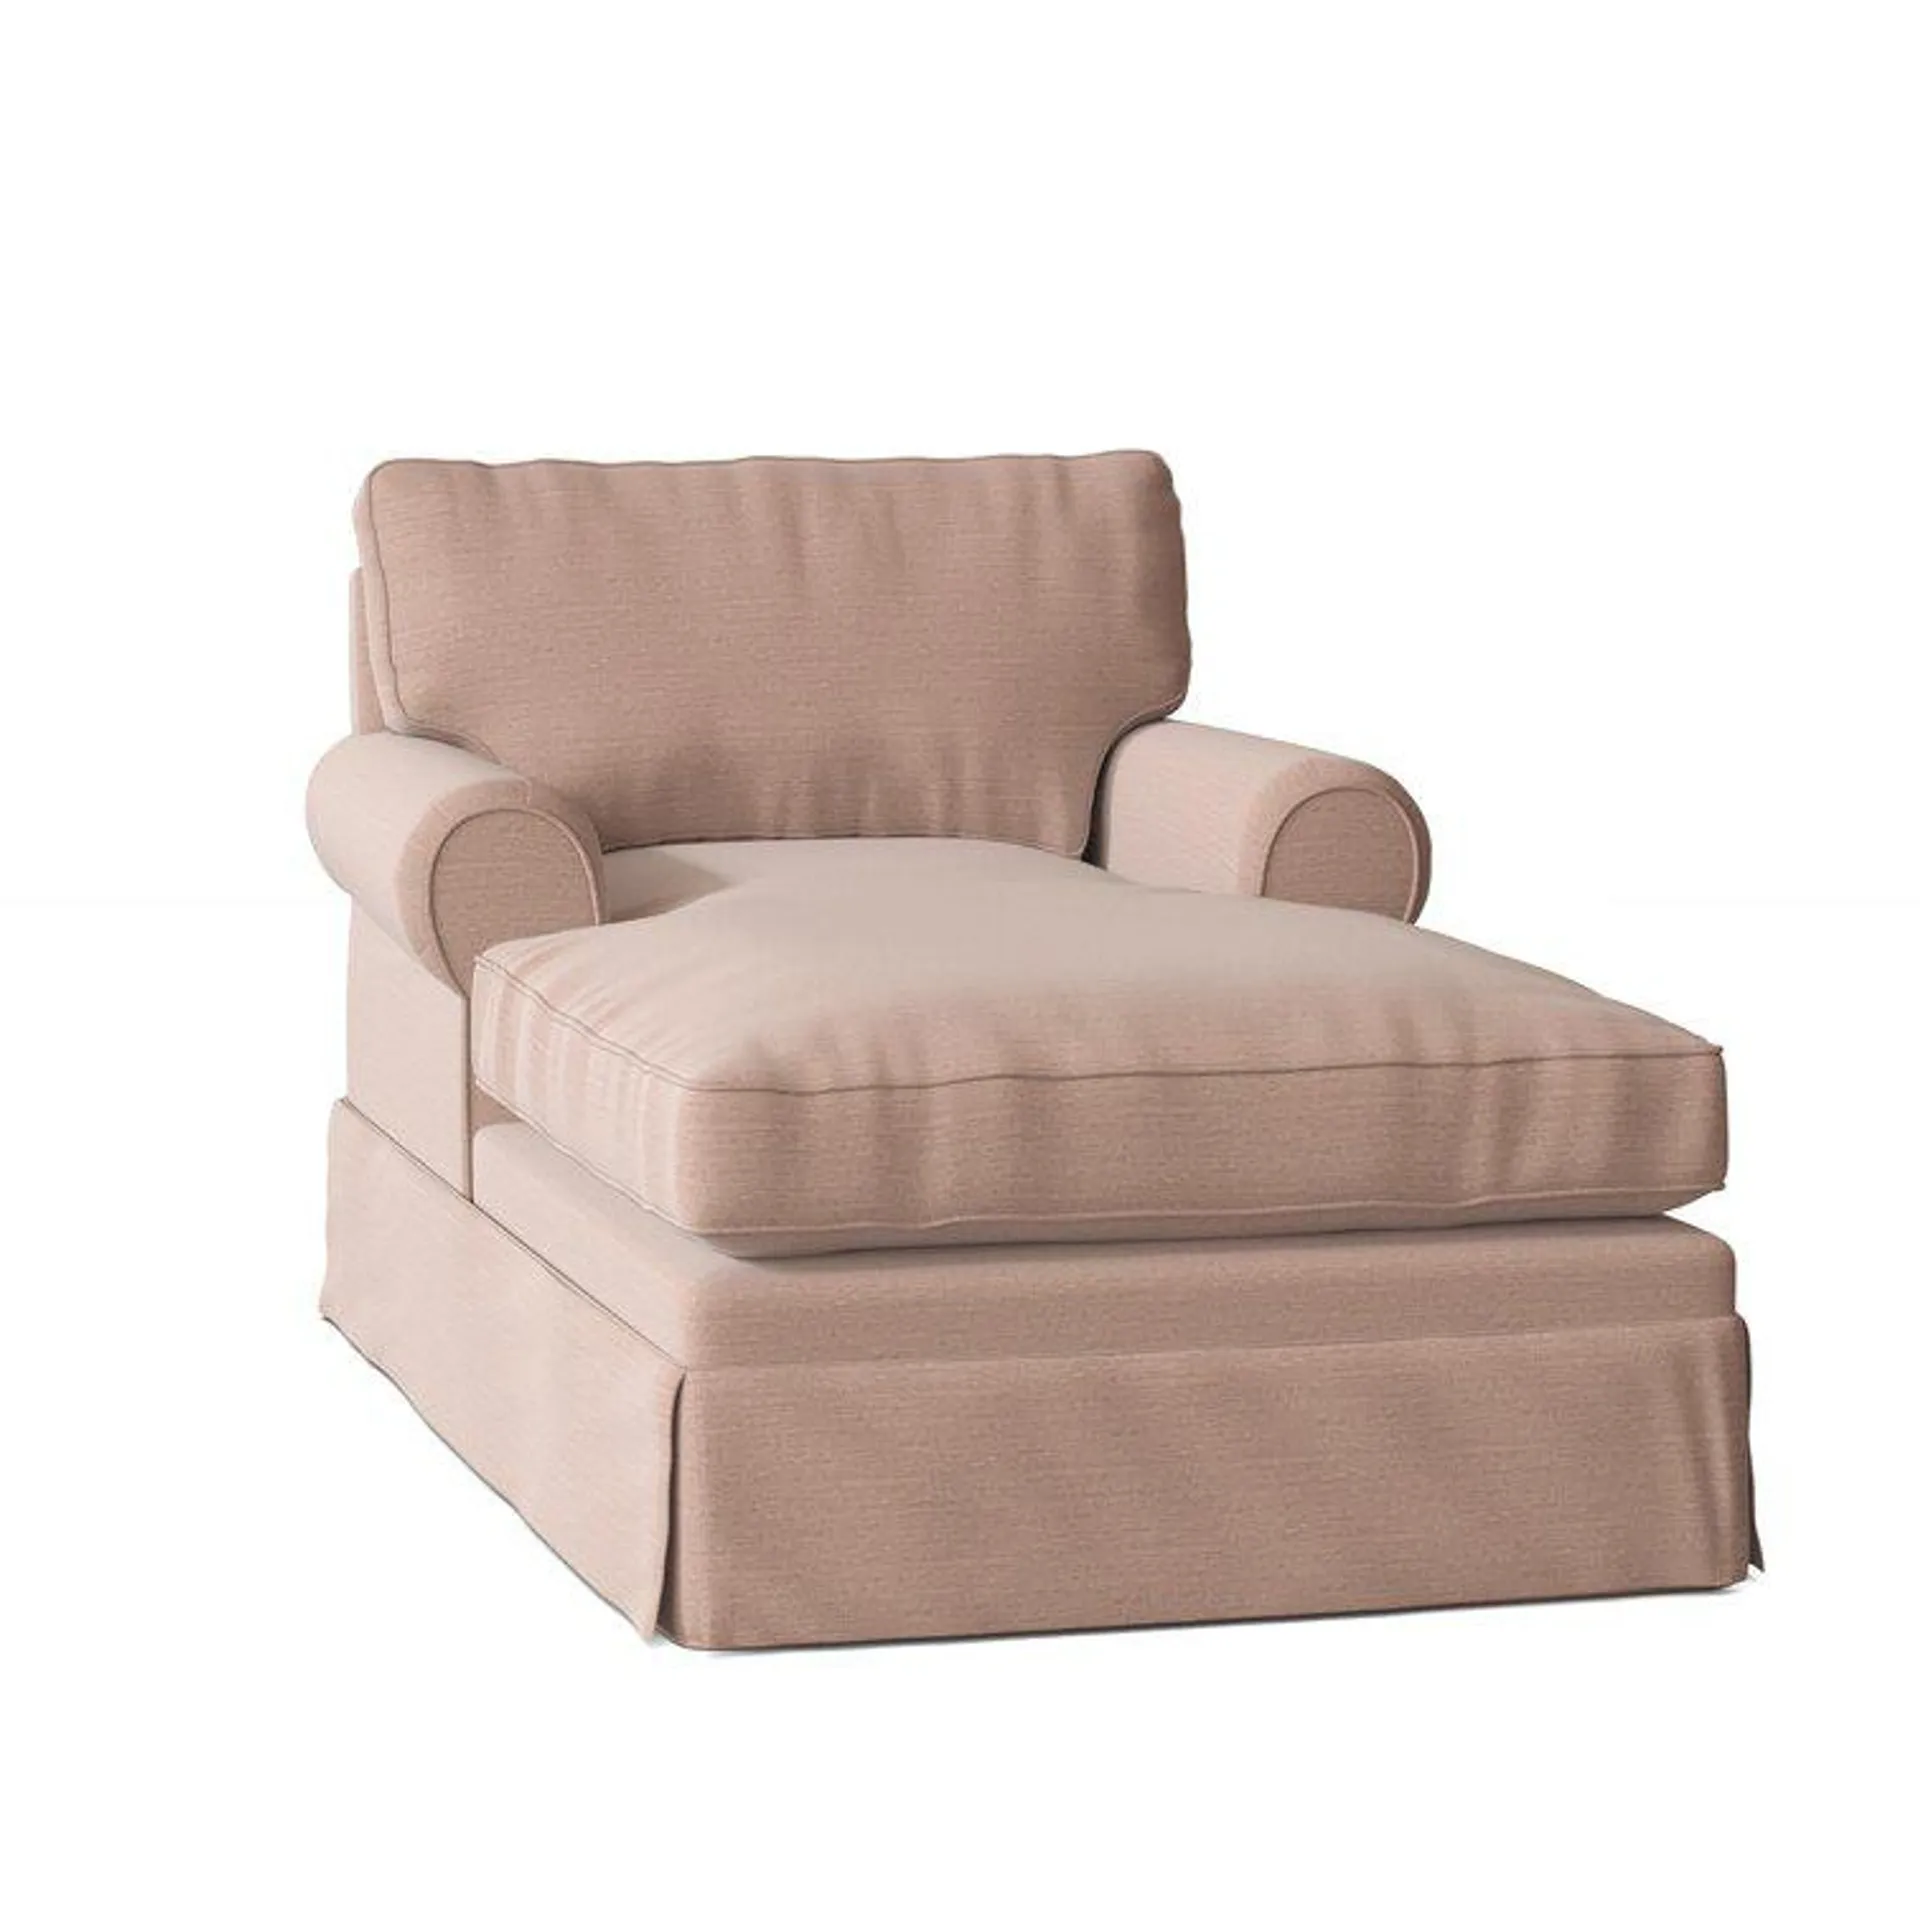 Cade Slipcovered Chaise Lounge